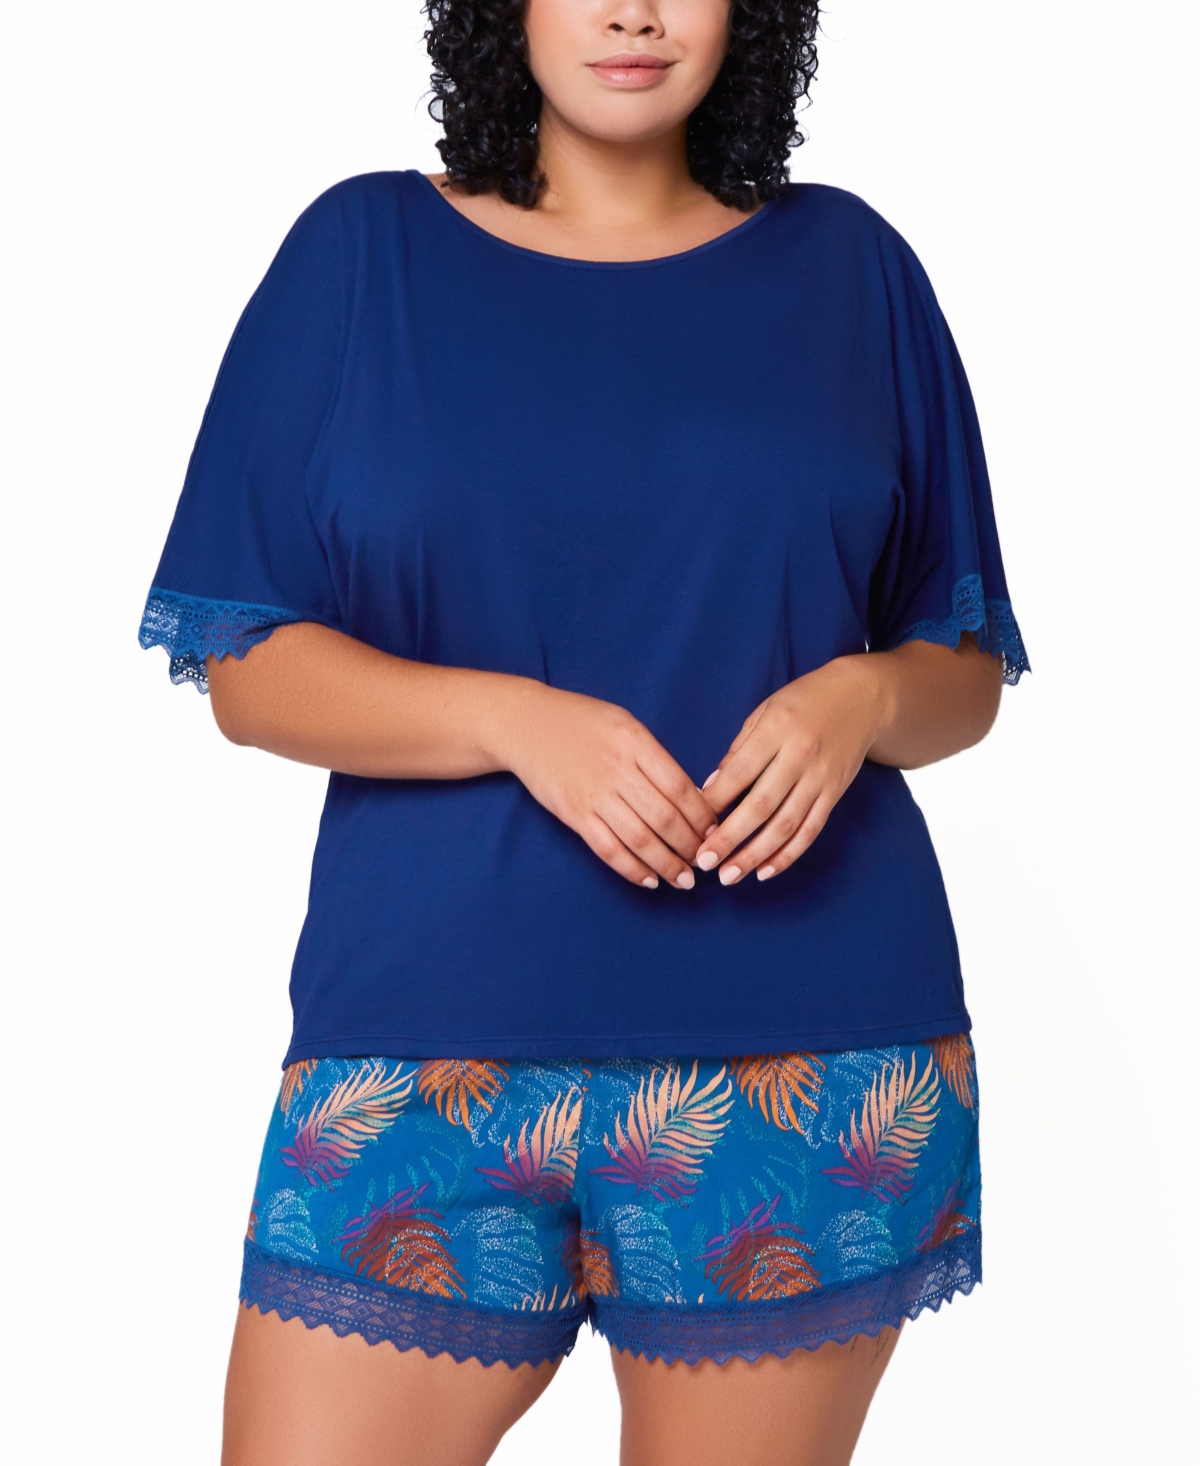 Icollection Plus Size 2pc. Soft Pajama Set Trimmed In Lace In Navy-blue